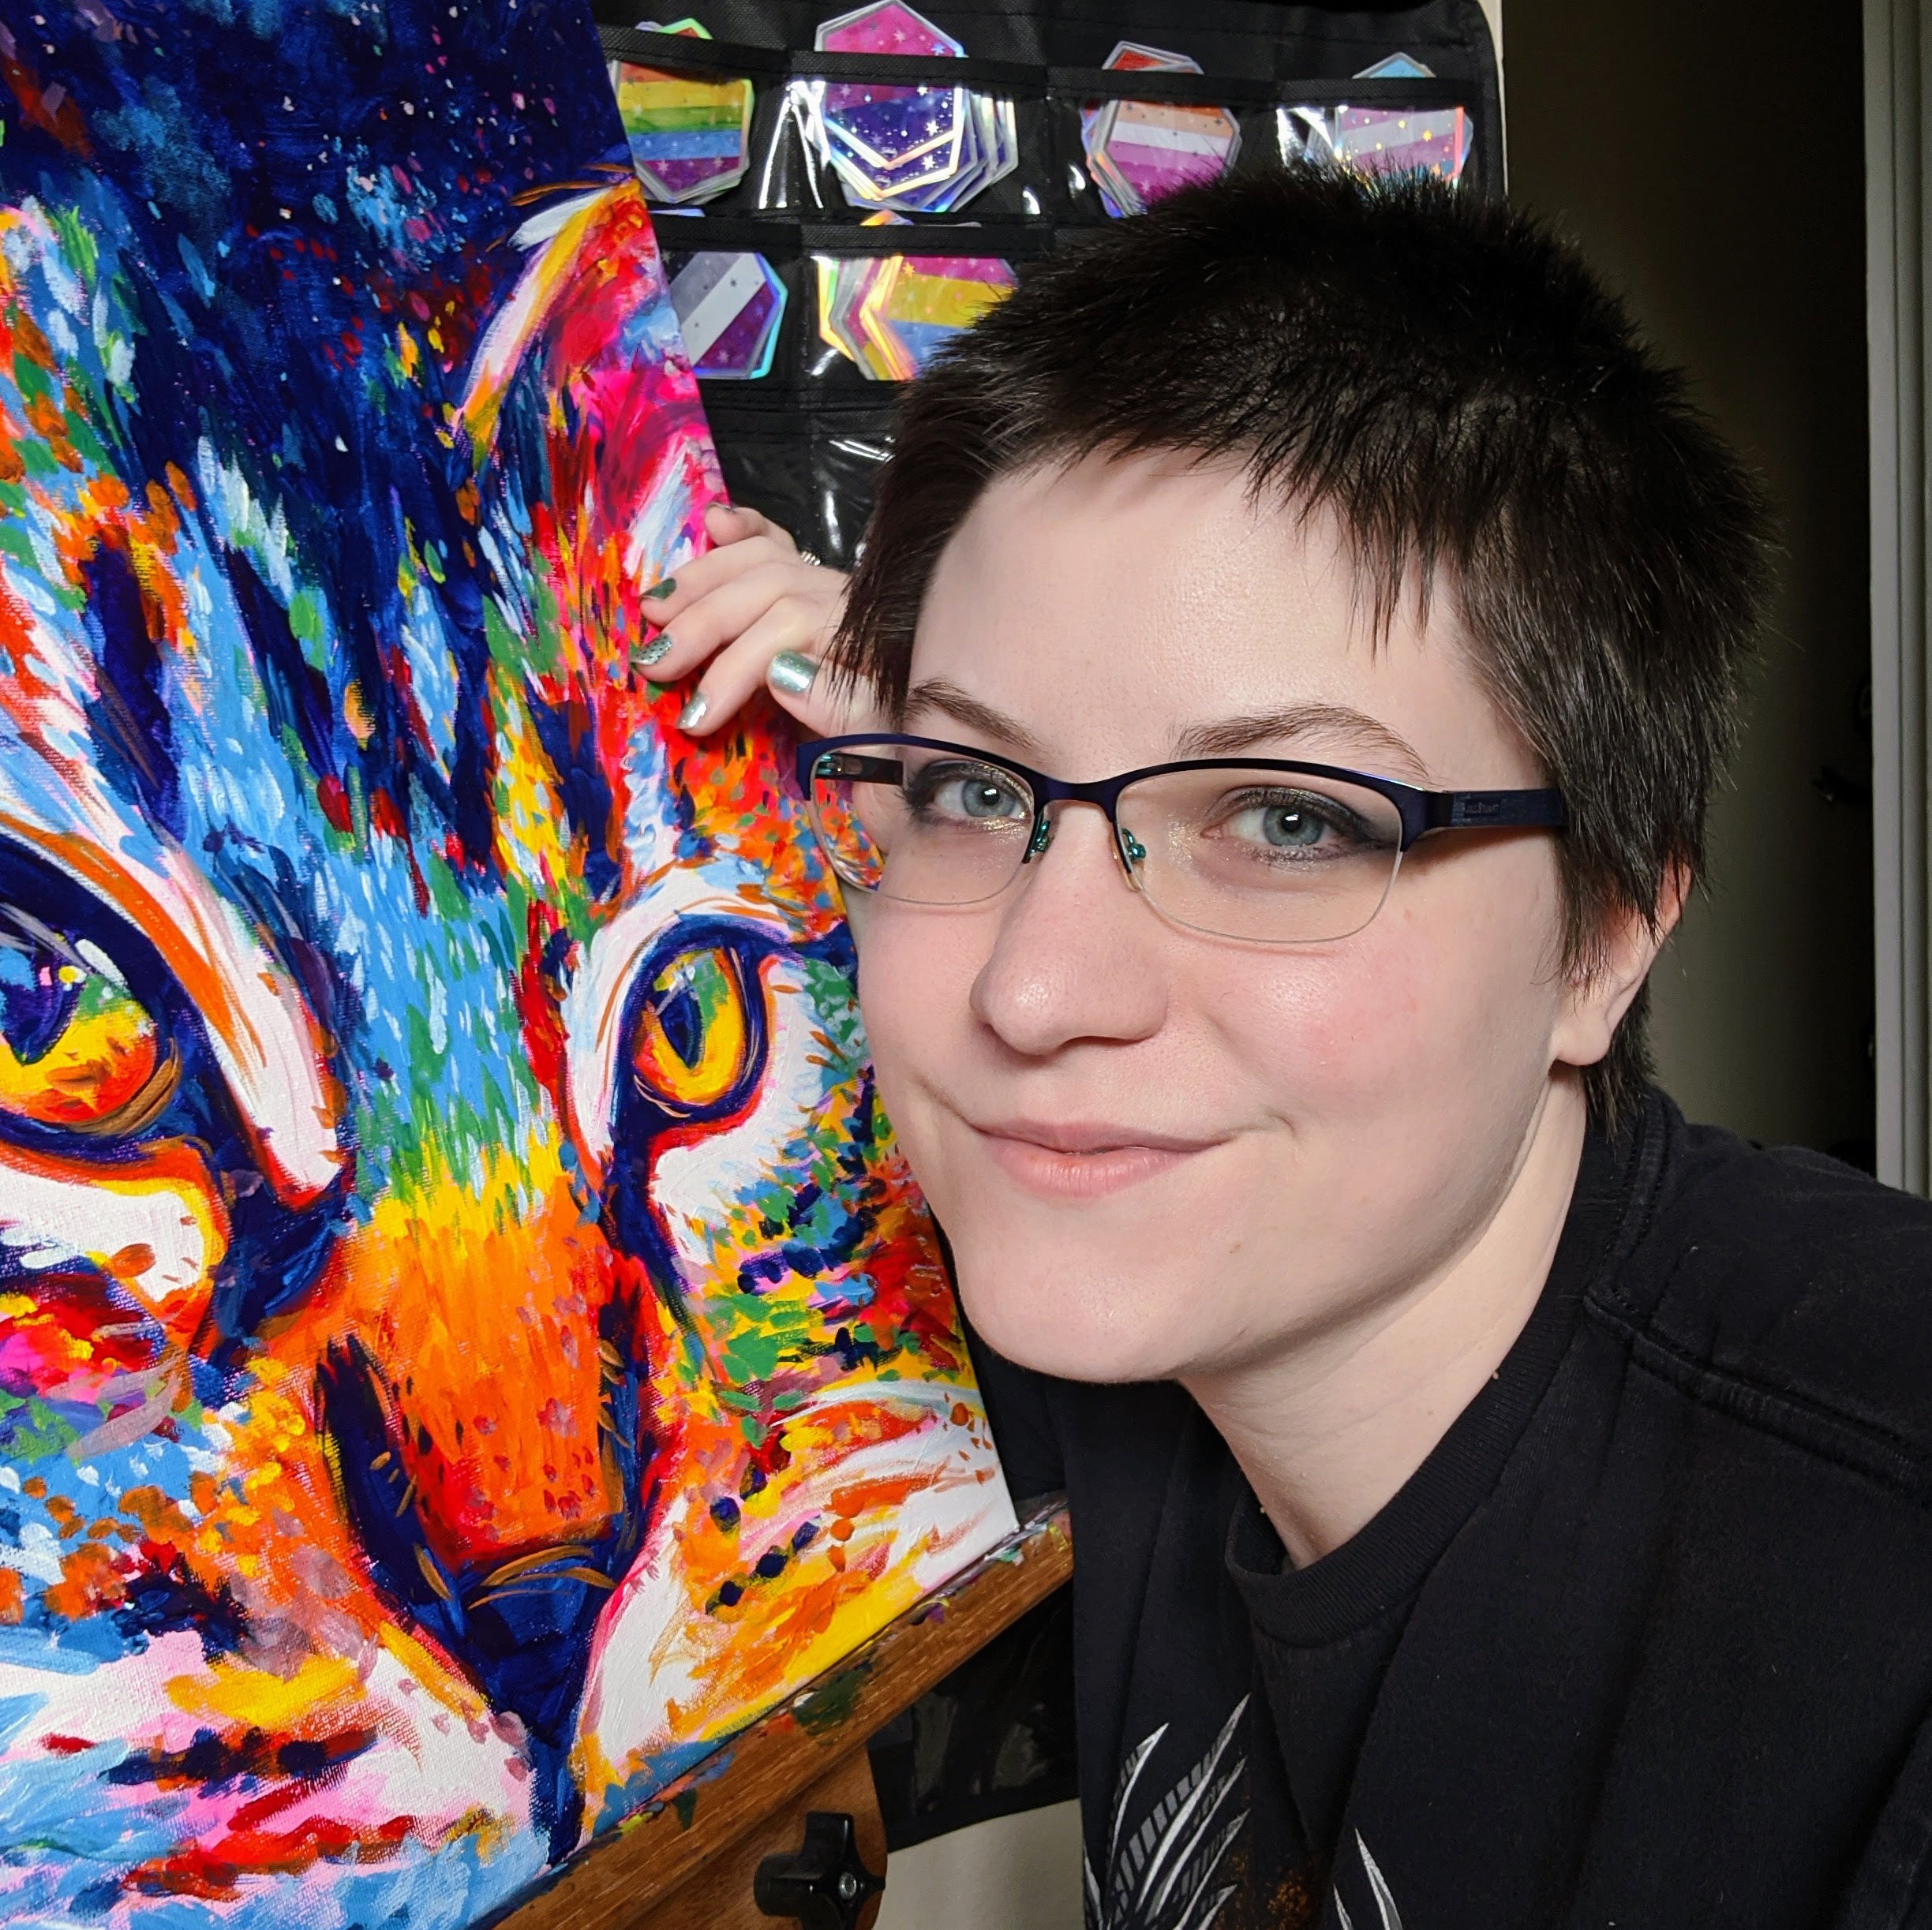 Photo of the artist Kelli, next to a vibrant painting of a cat